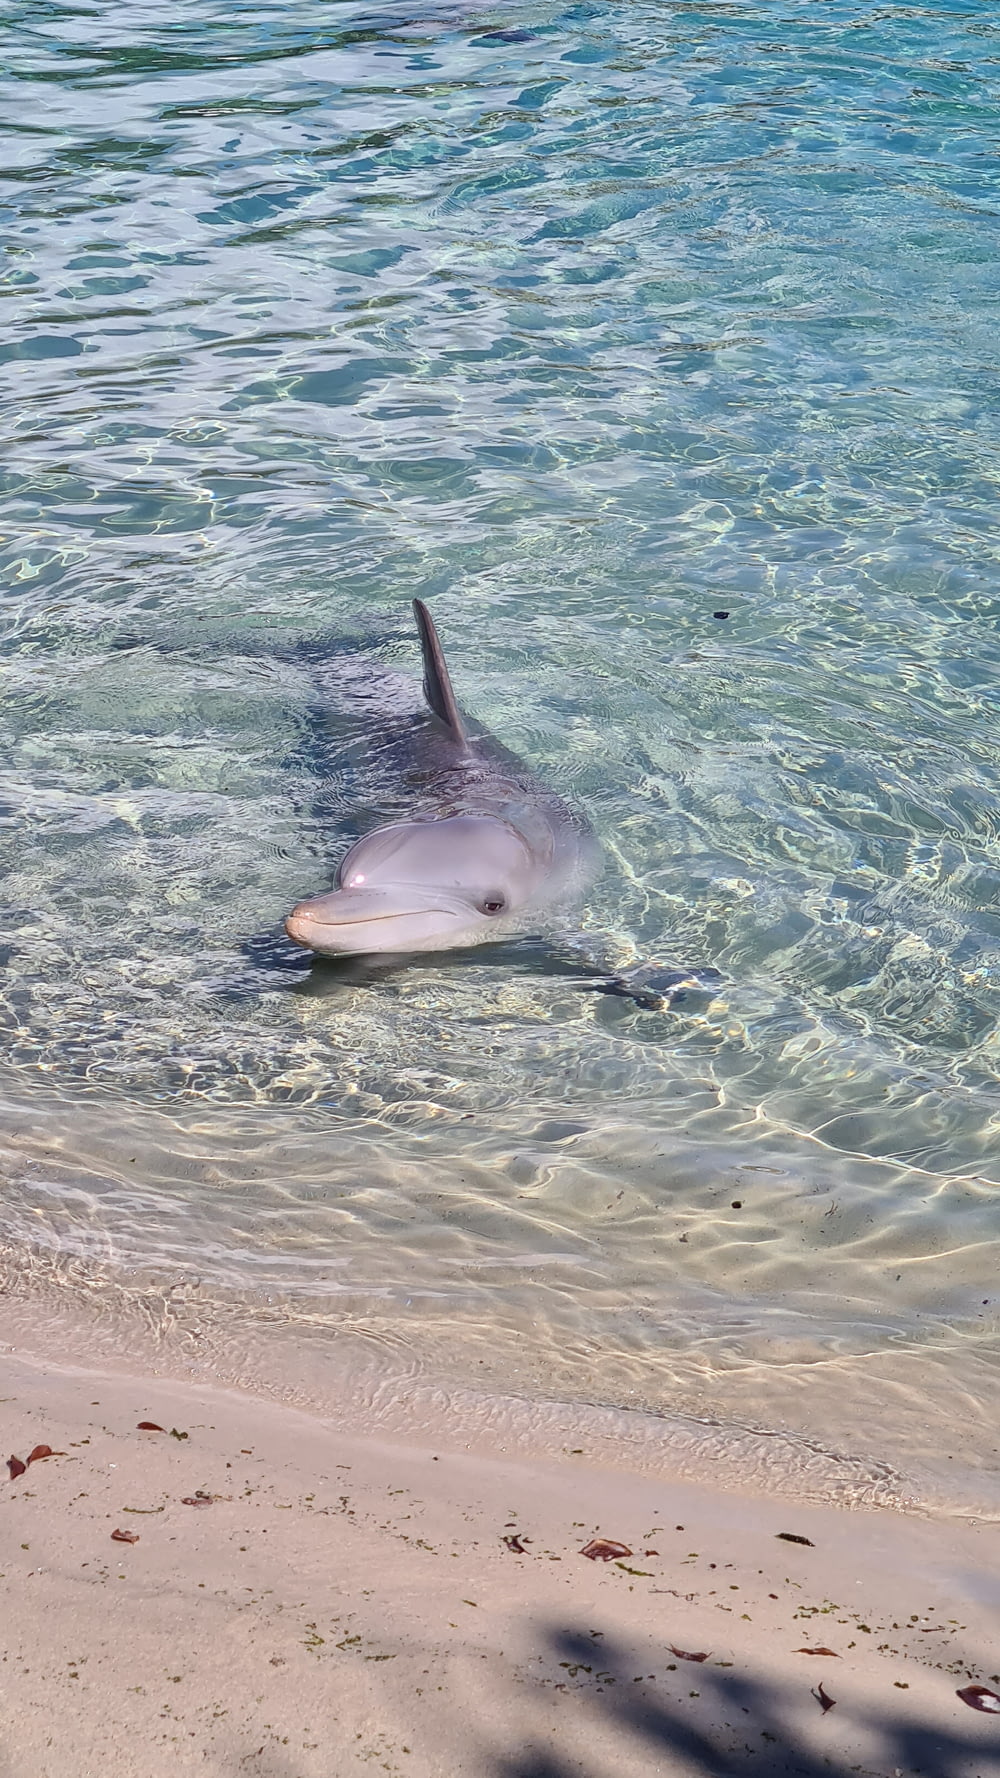 gray dolphin on body of water during daytime